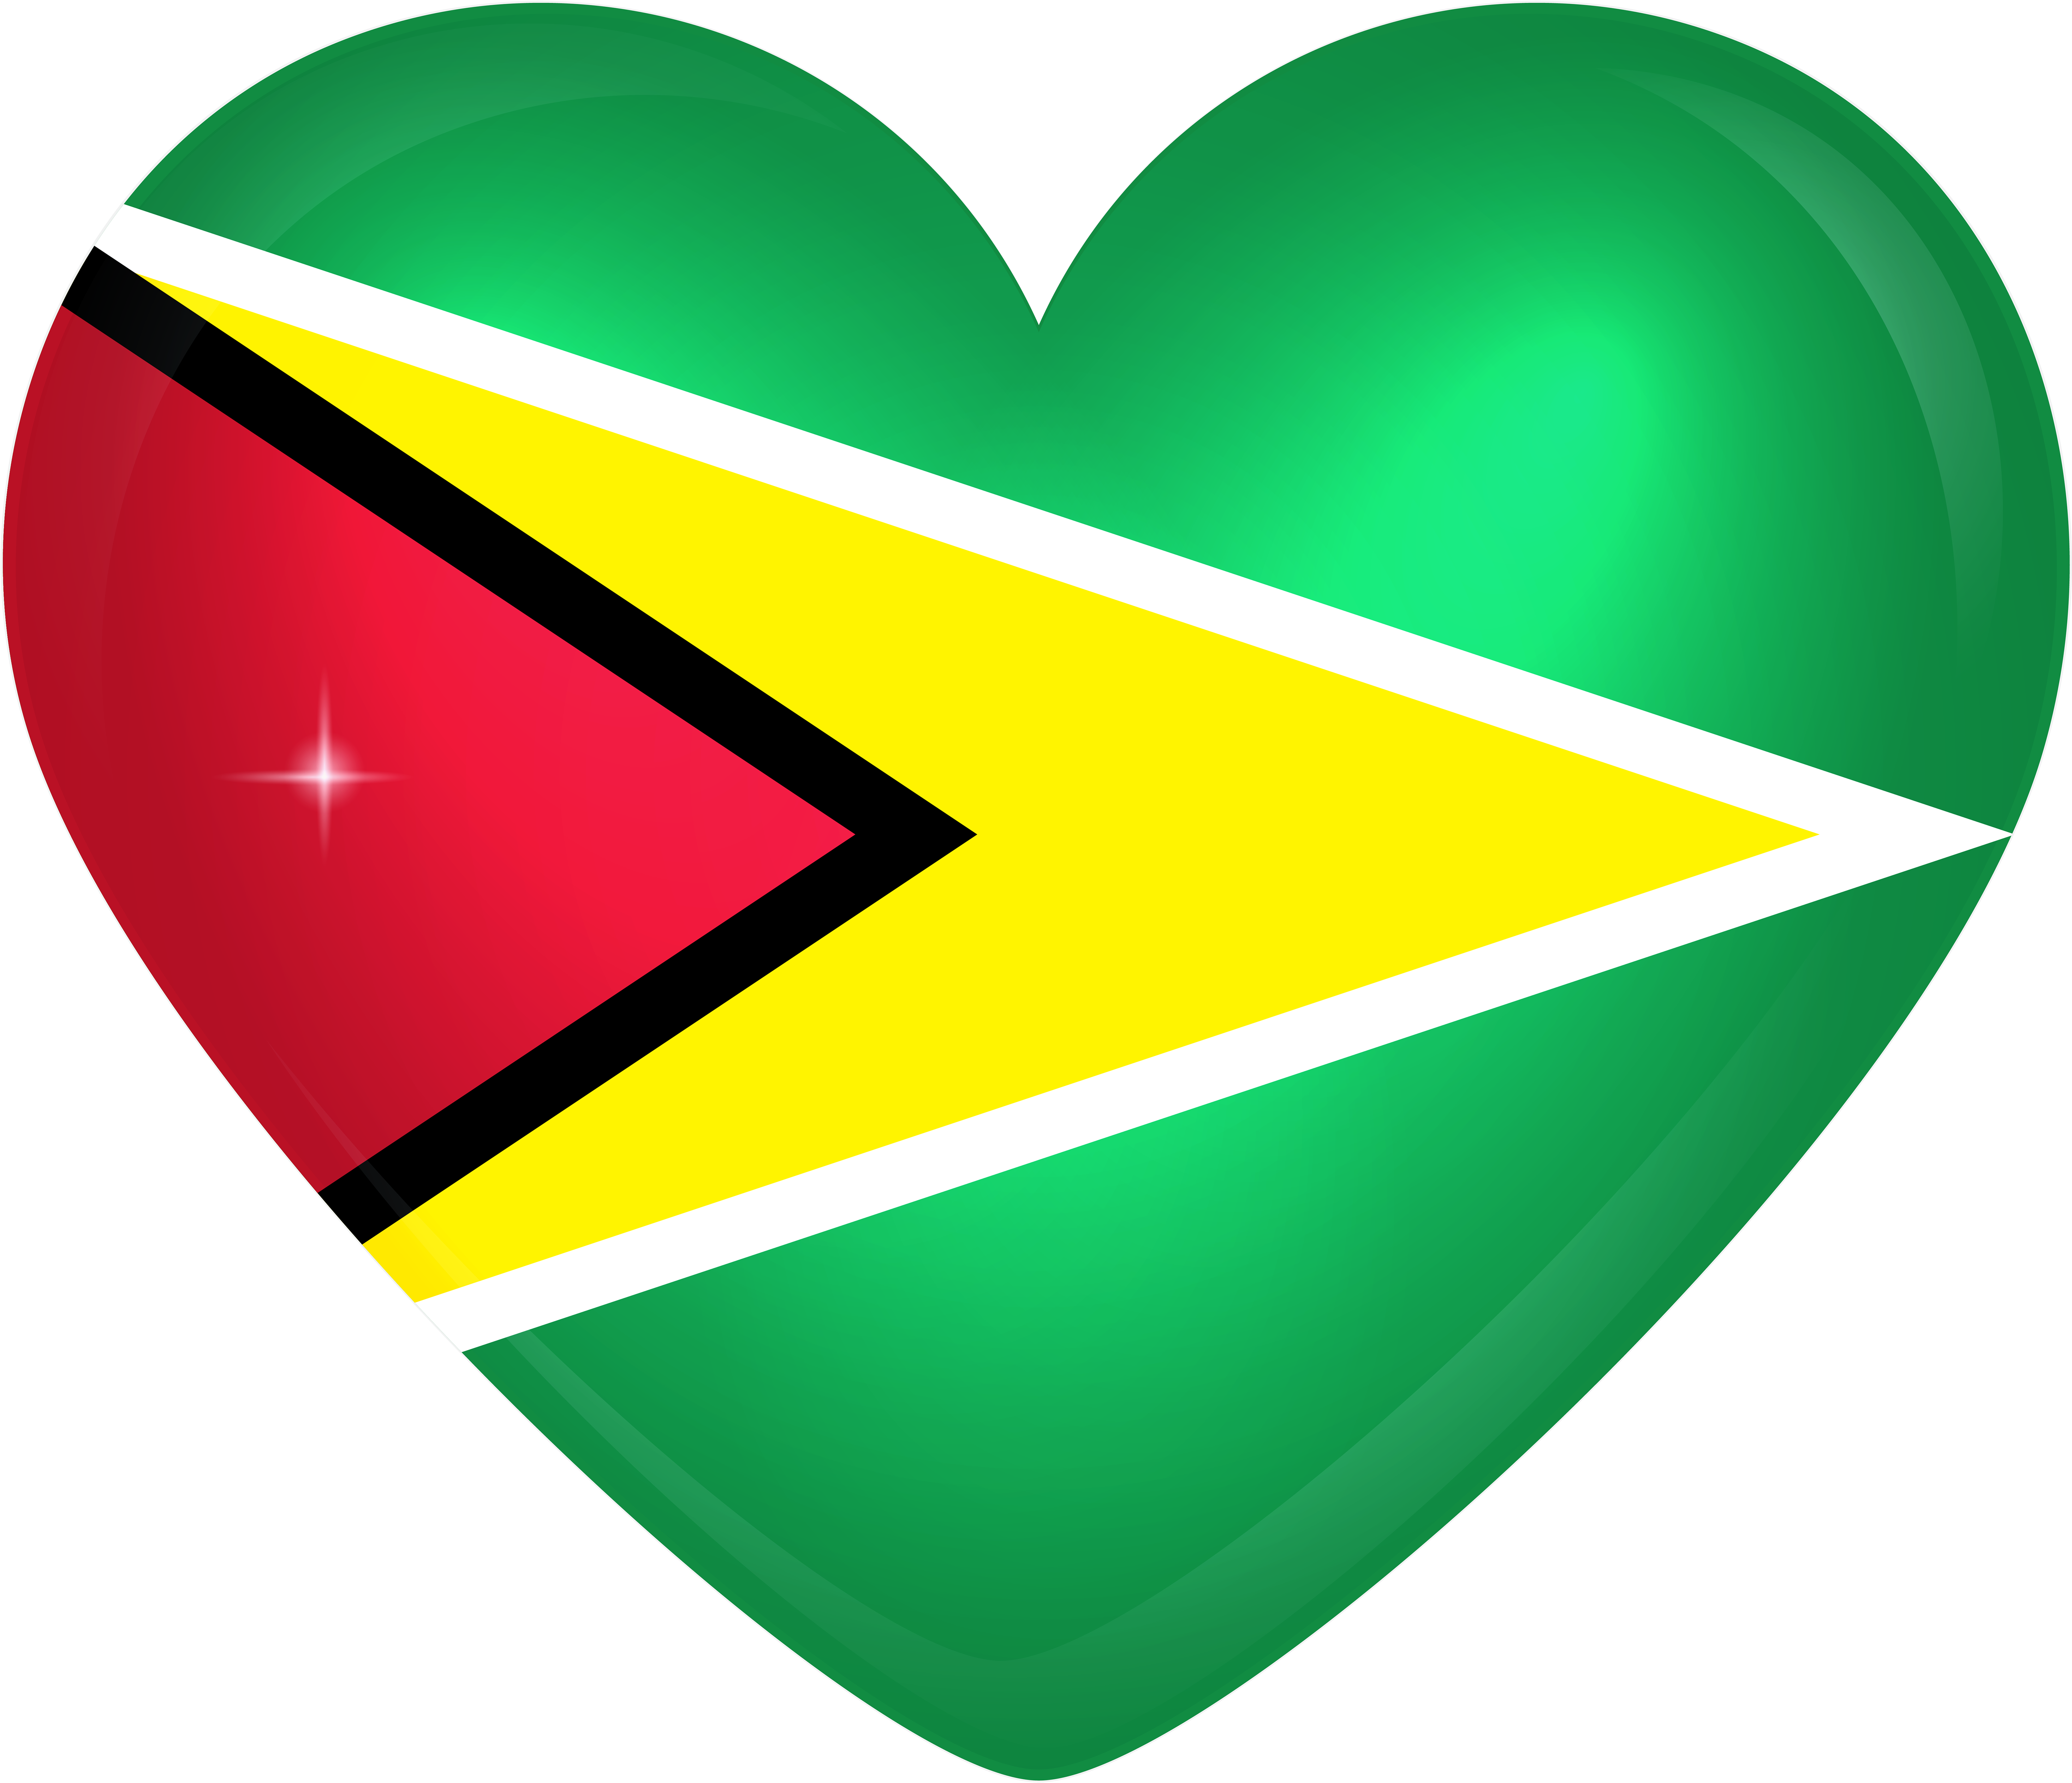 A Heart Shaped Flag With A Yellow Triangle And Red Triangle